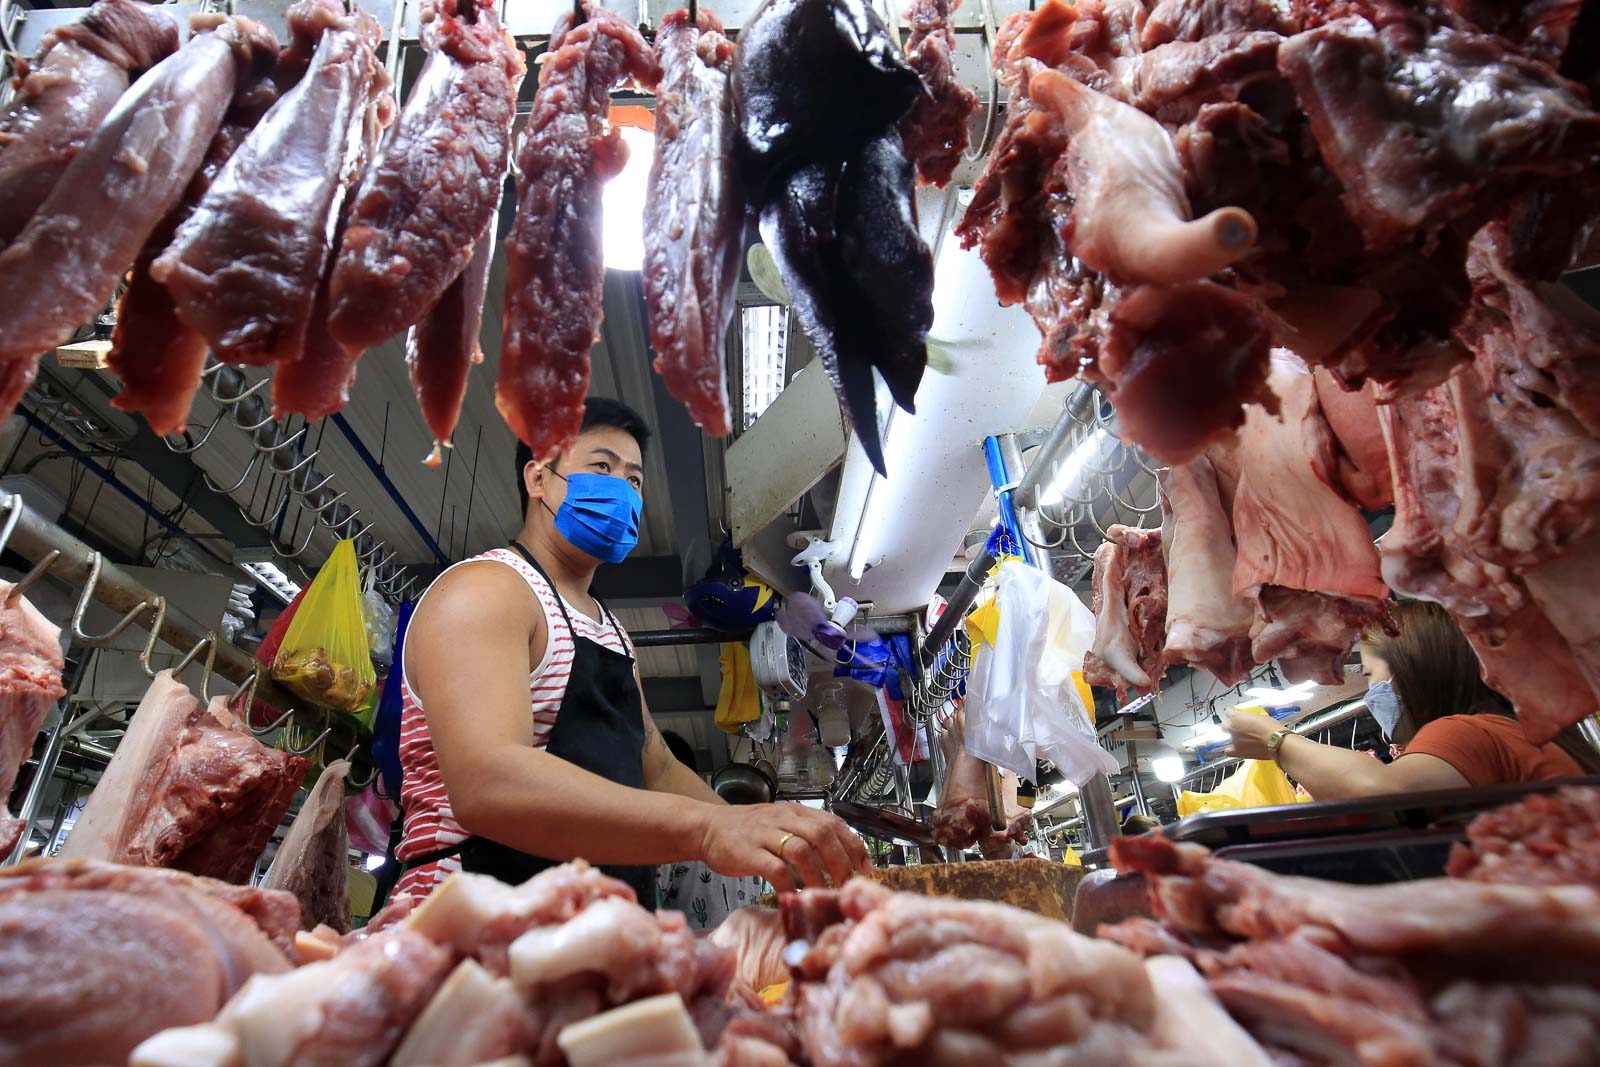 At the center of controversies: Why do we love to hate and hate to love meat?